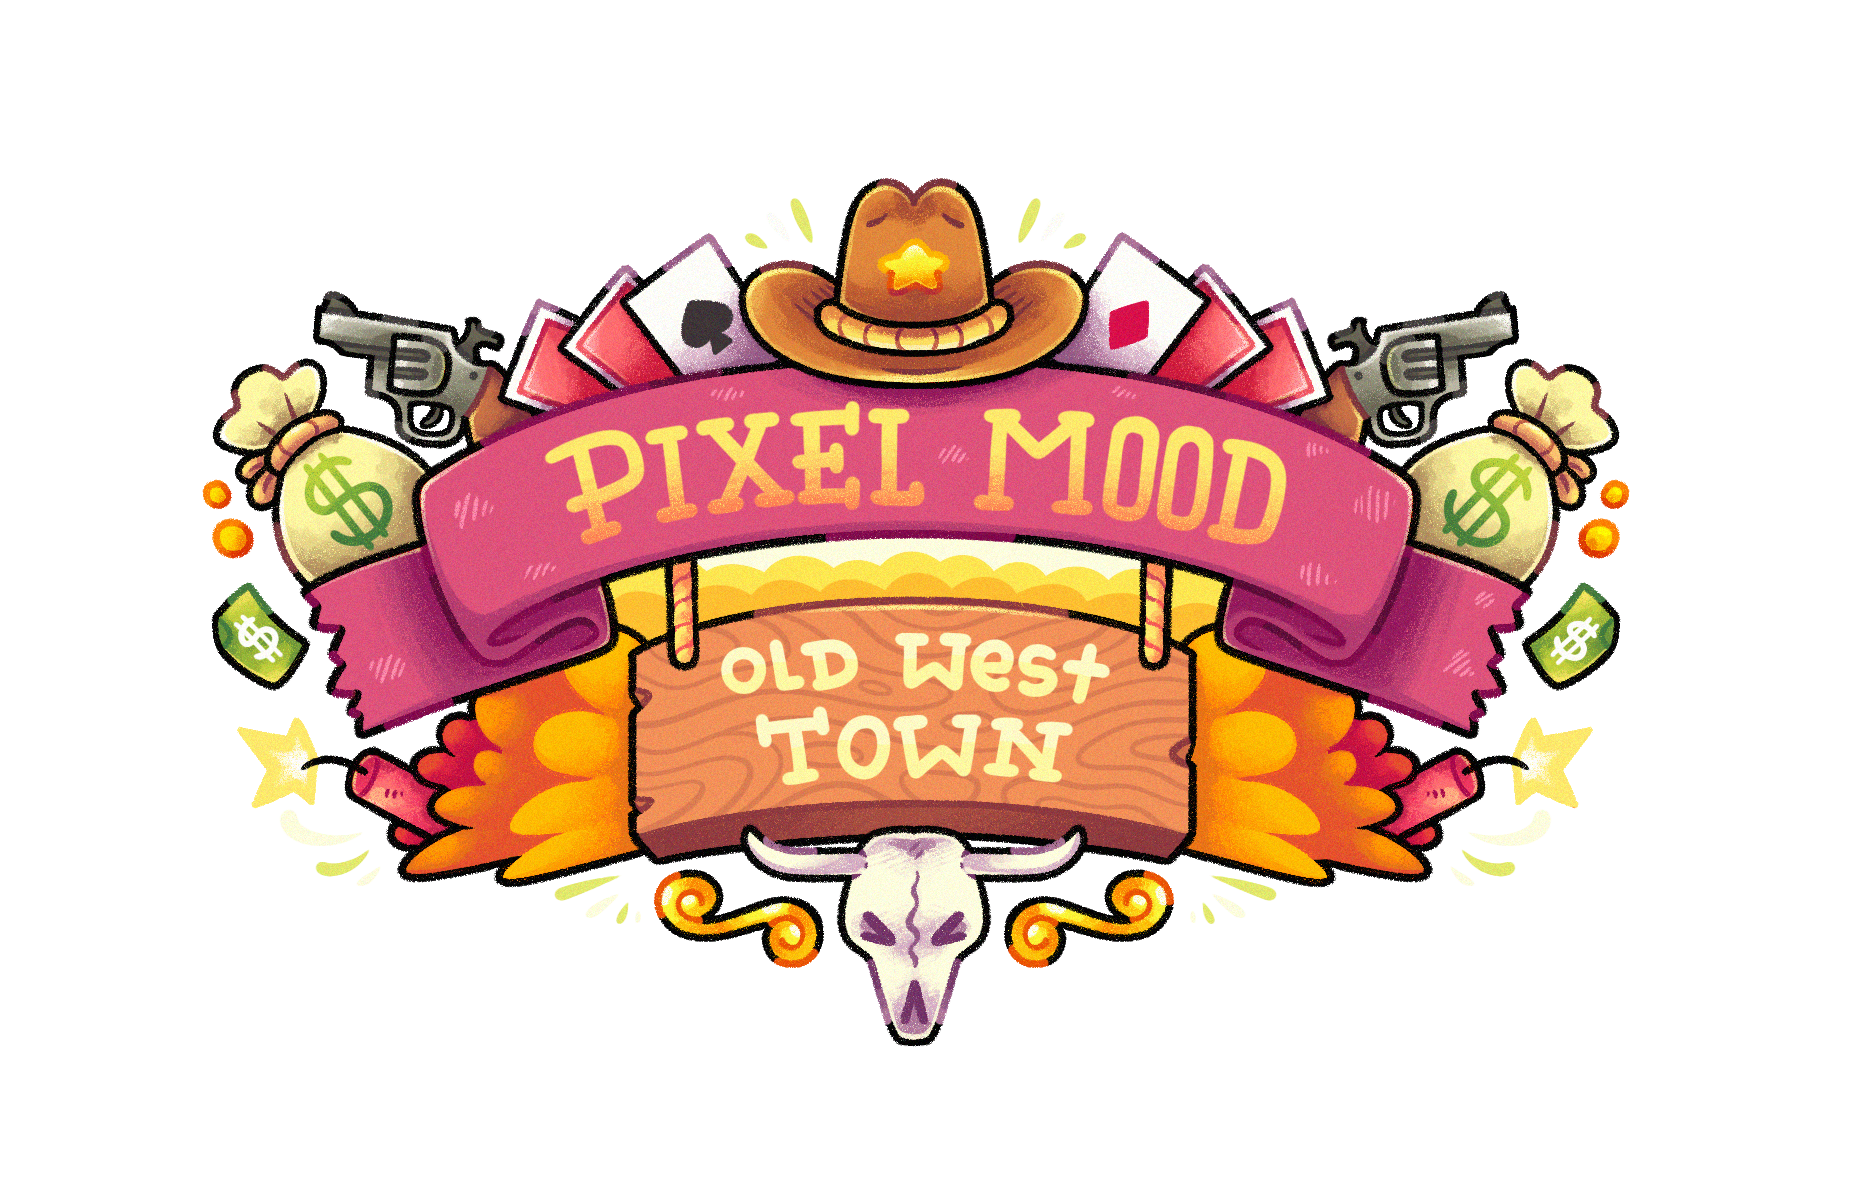 Pixel Mood - Old West Town